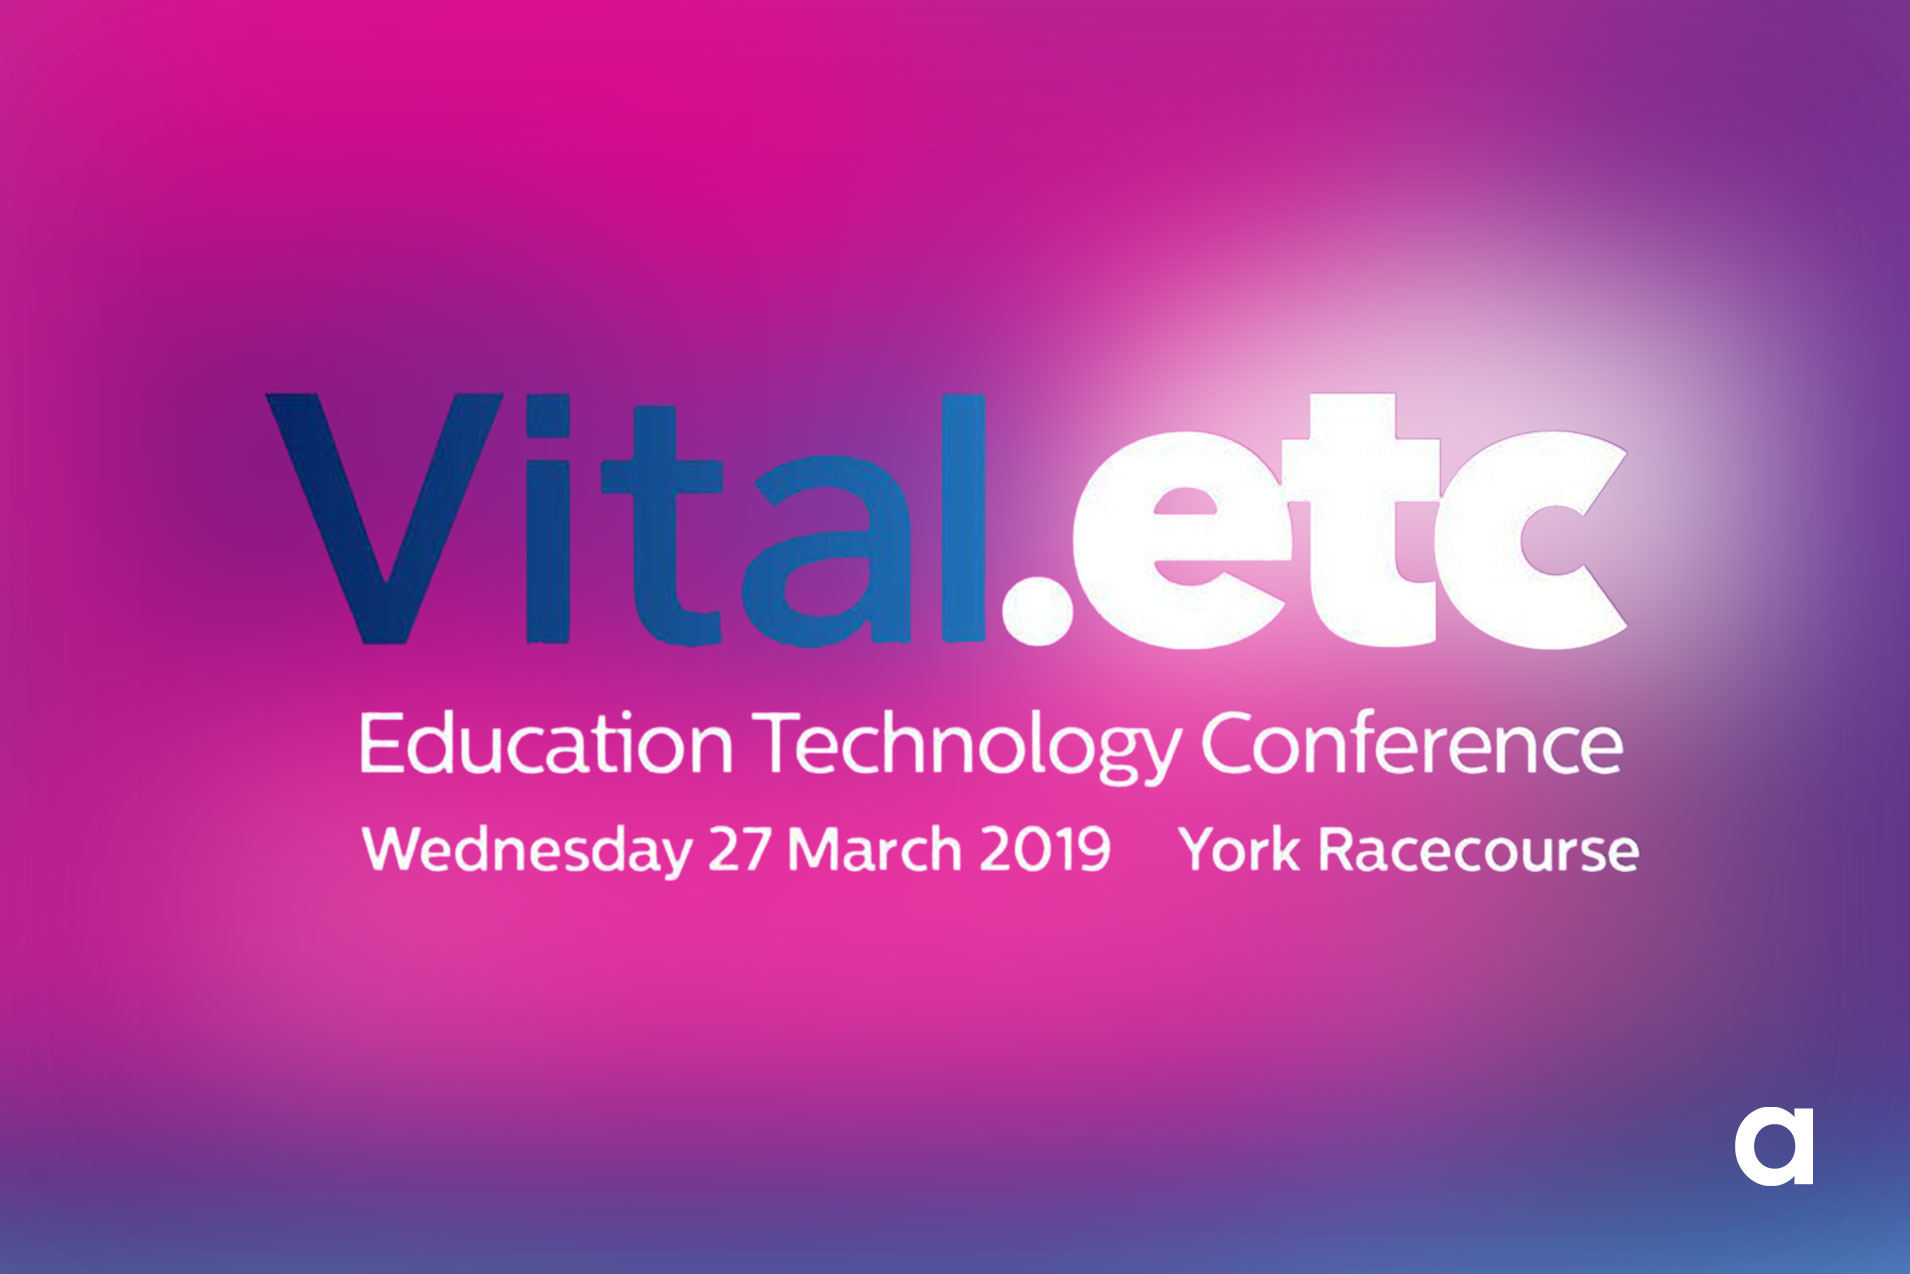 The Vital York Education Technology Conference